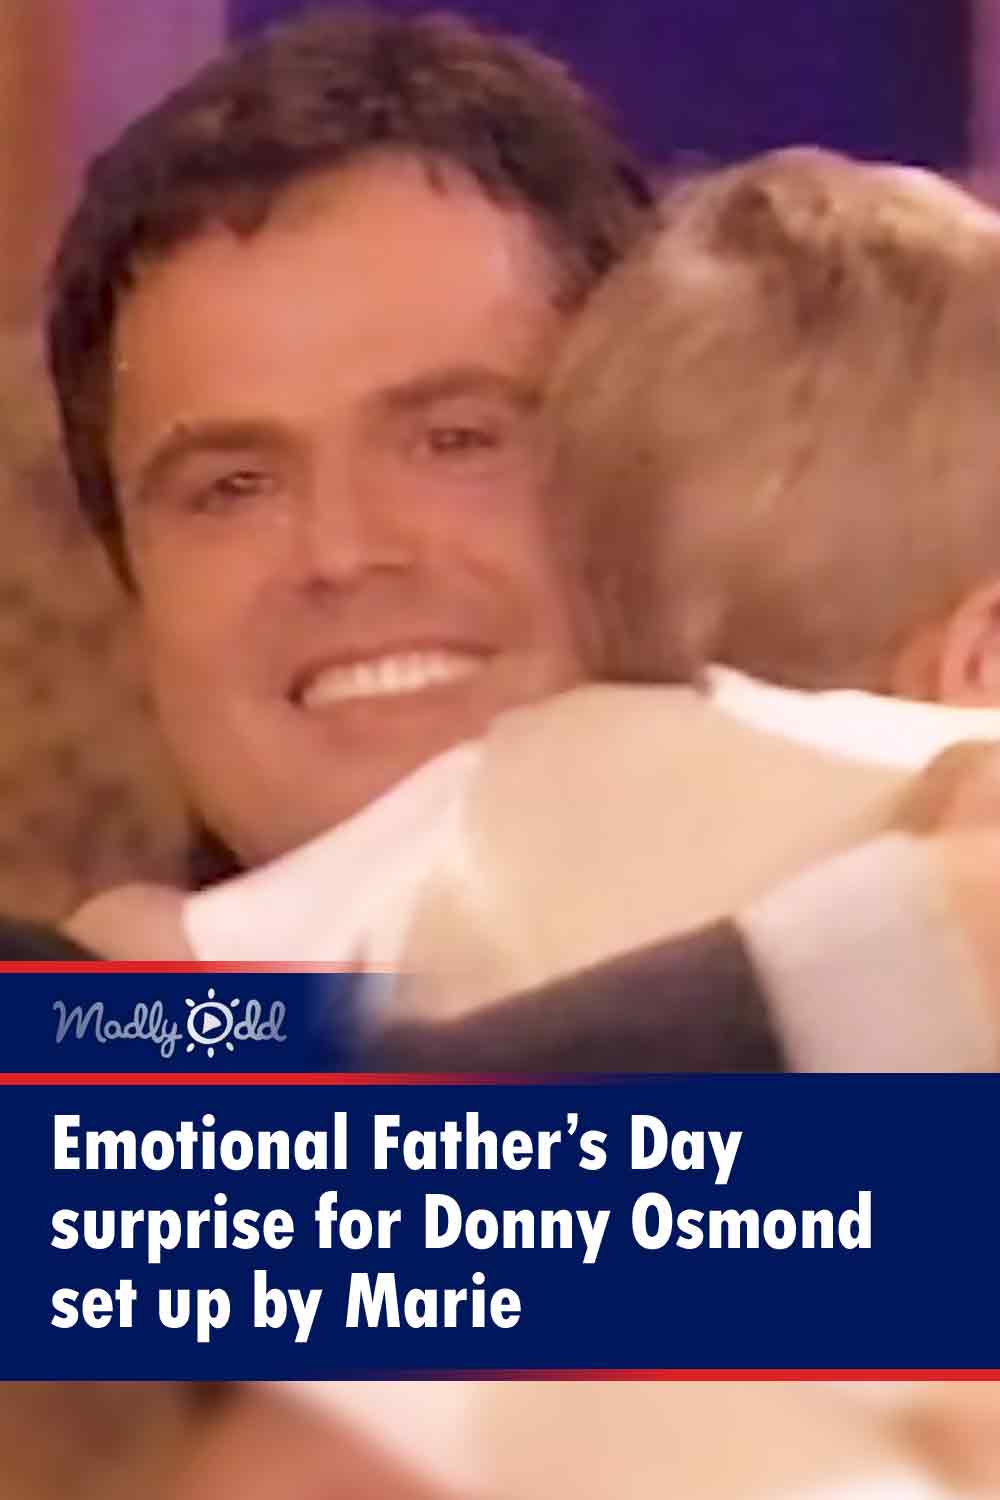 Emotional Father’s Day surprise for Donny Osmond set up by Marie